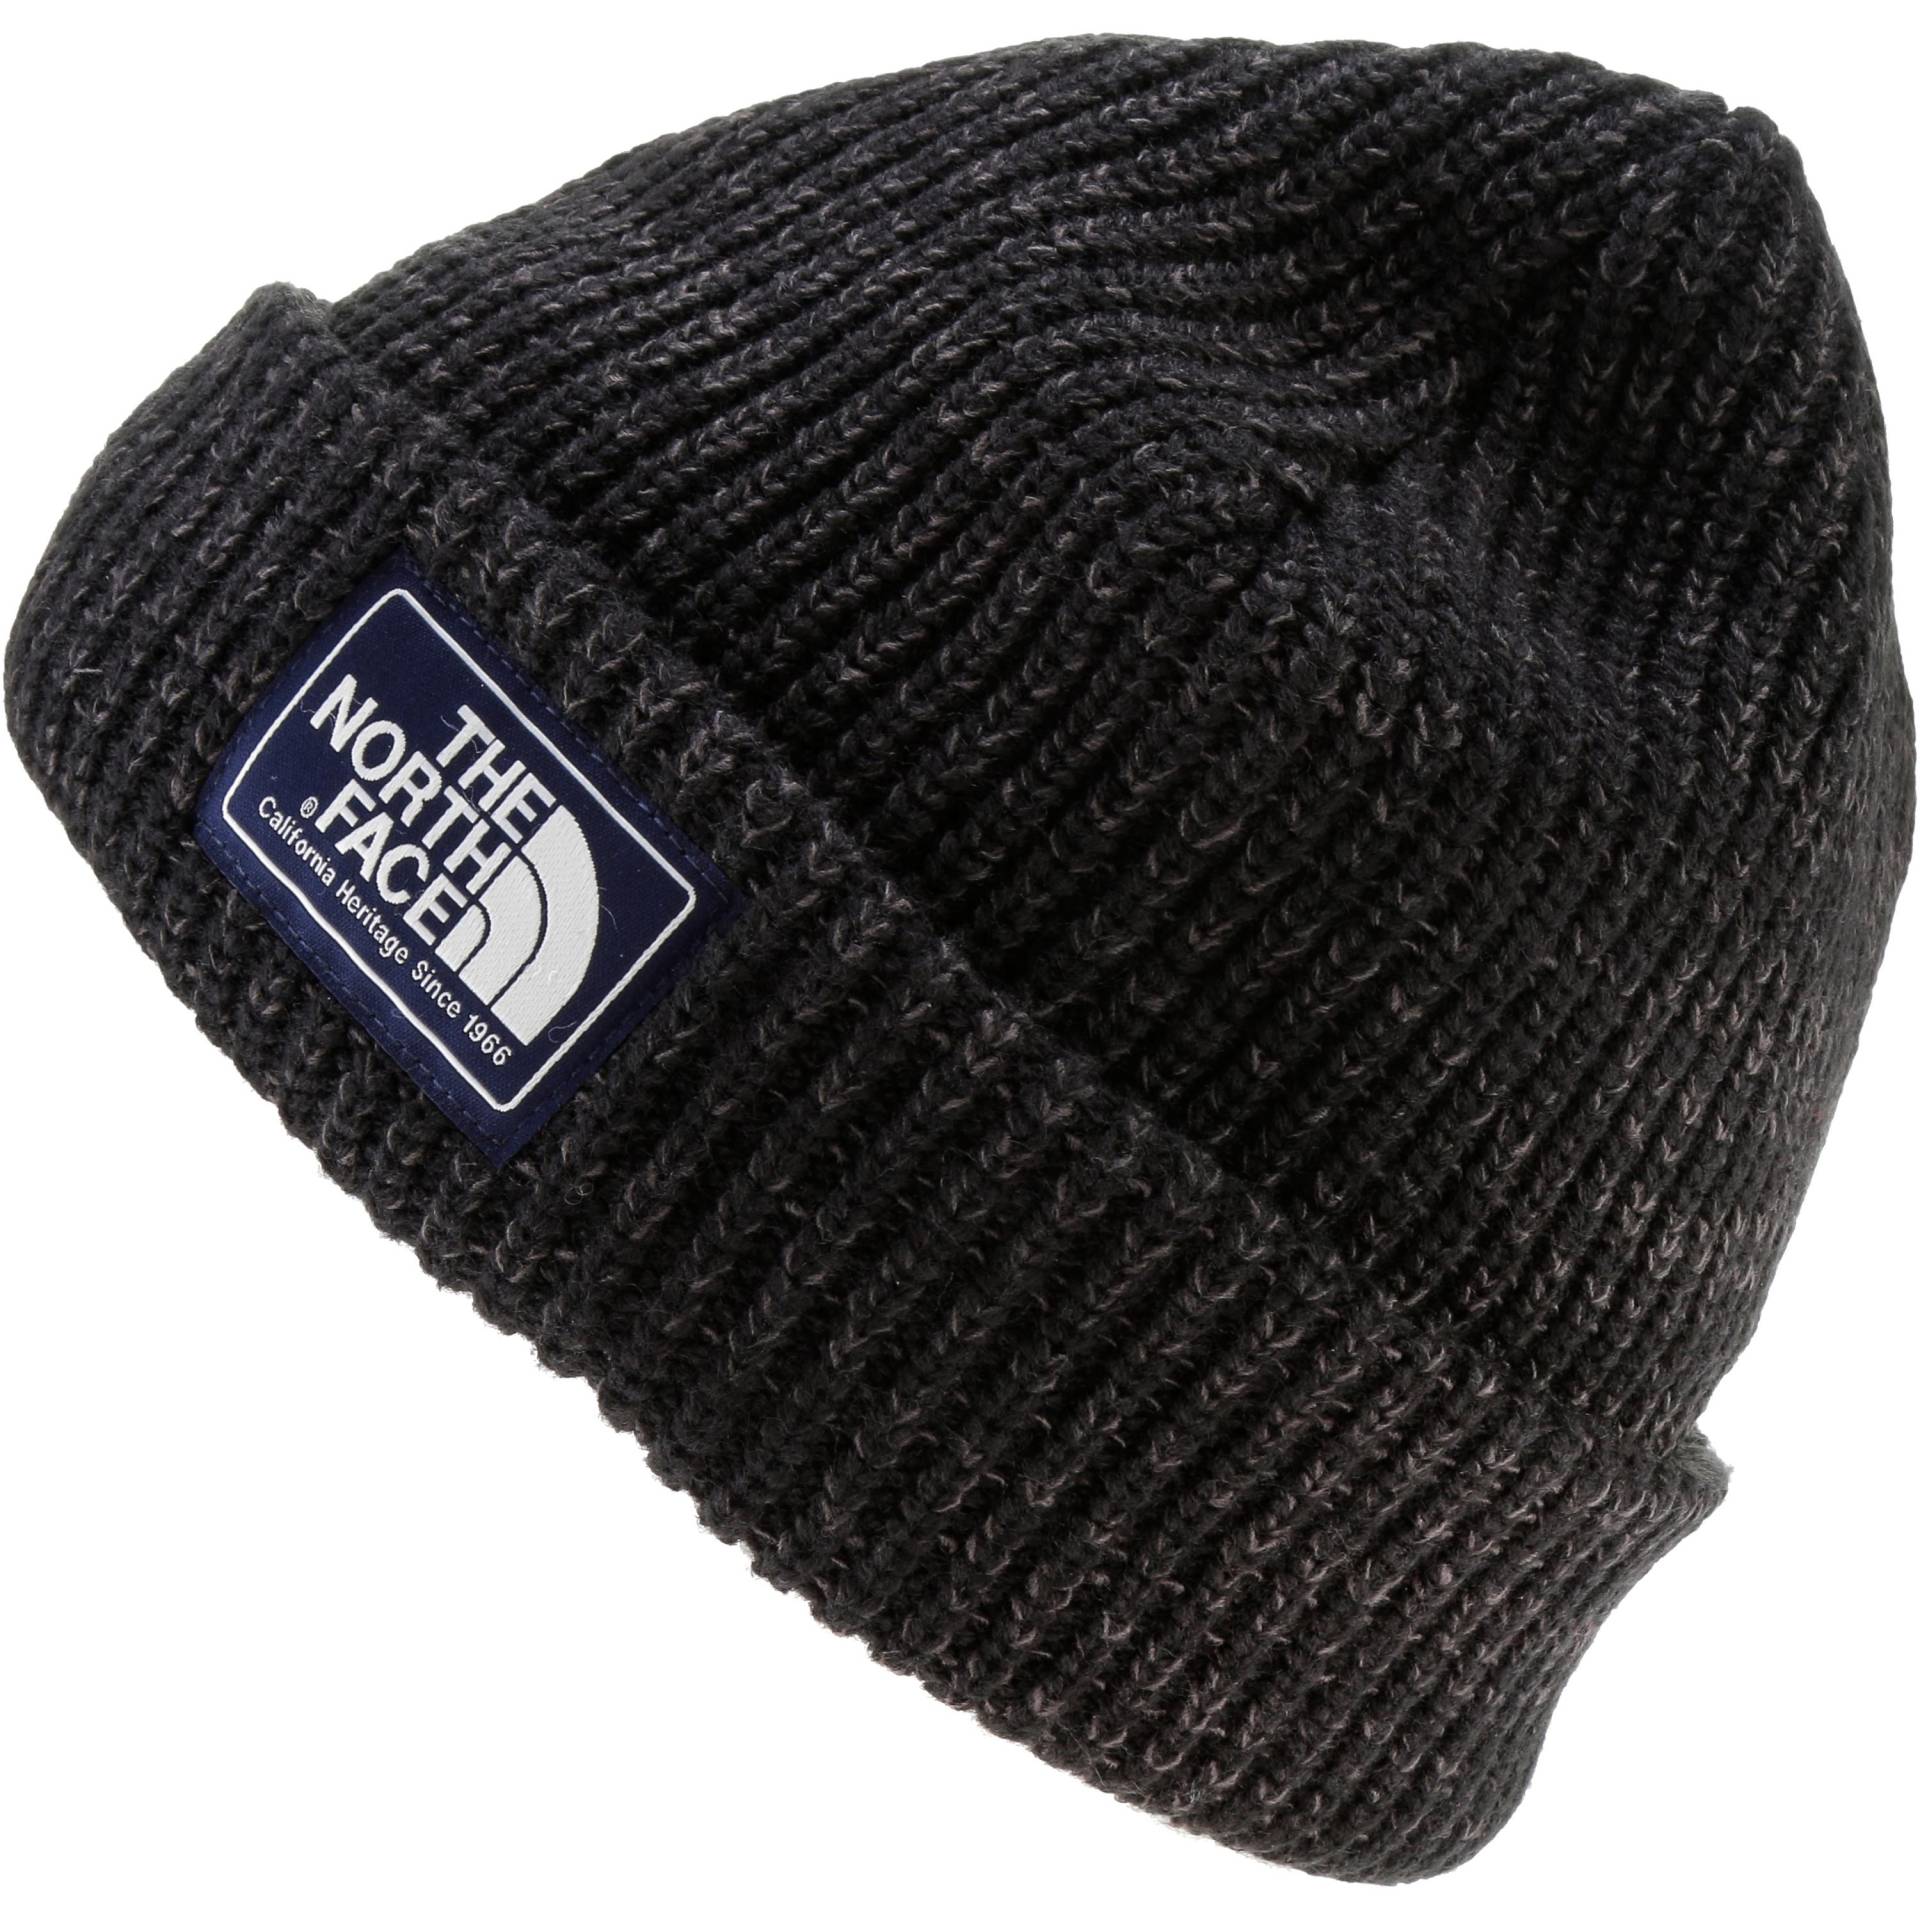 The North Face SALTY DOG Beanie von The North Face